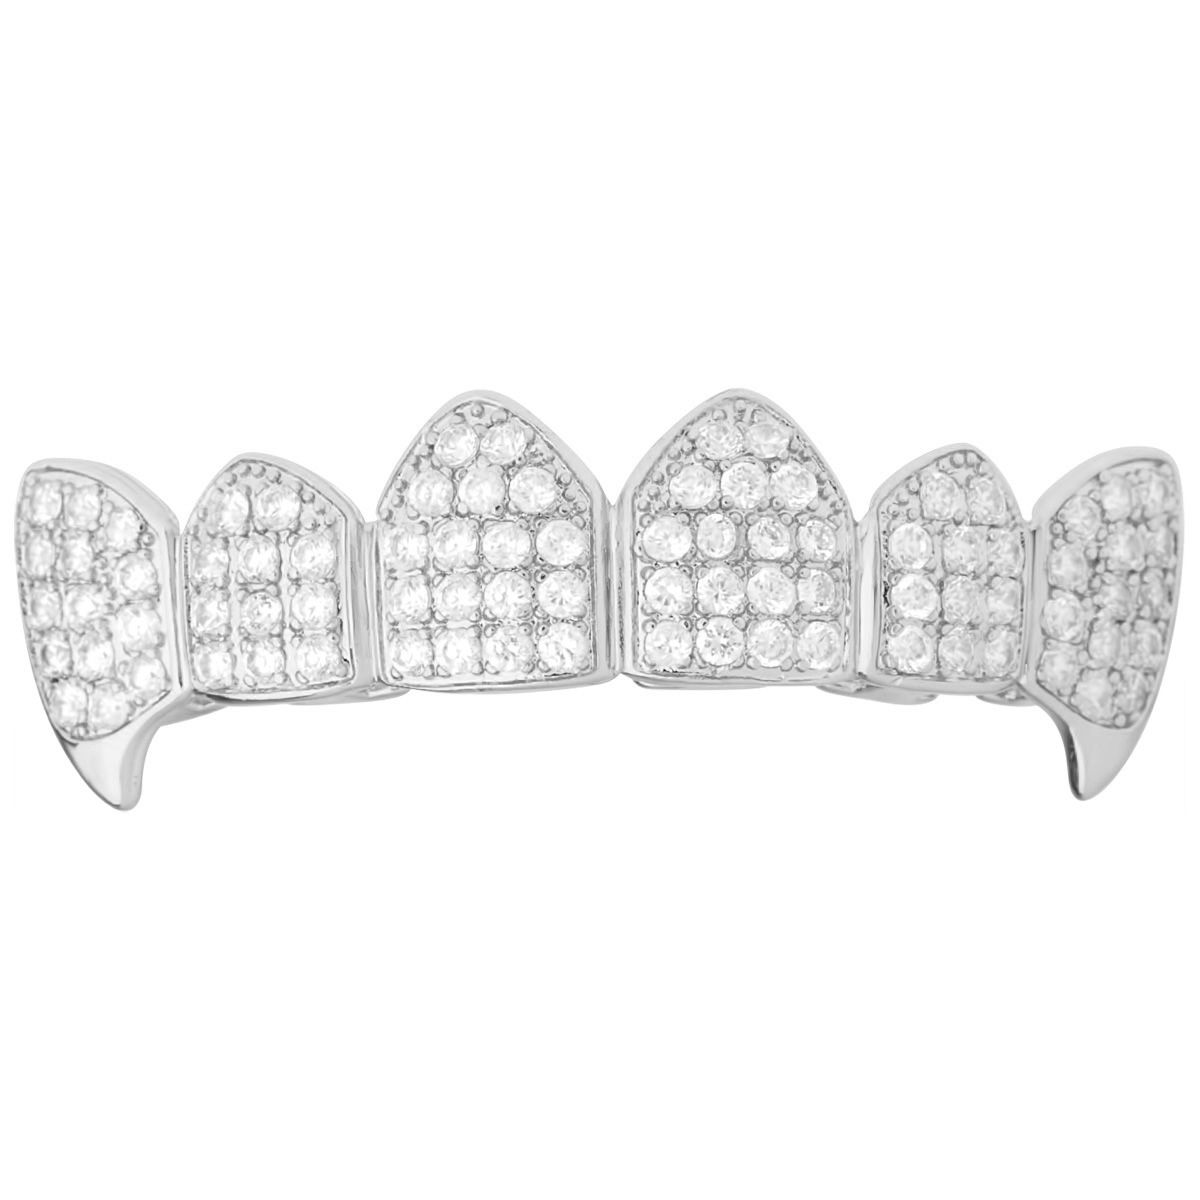 Grillz – Silber – One size fits all – VAMPIRE ZIRKONIA Top